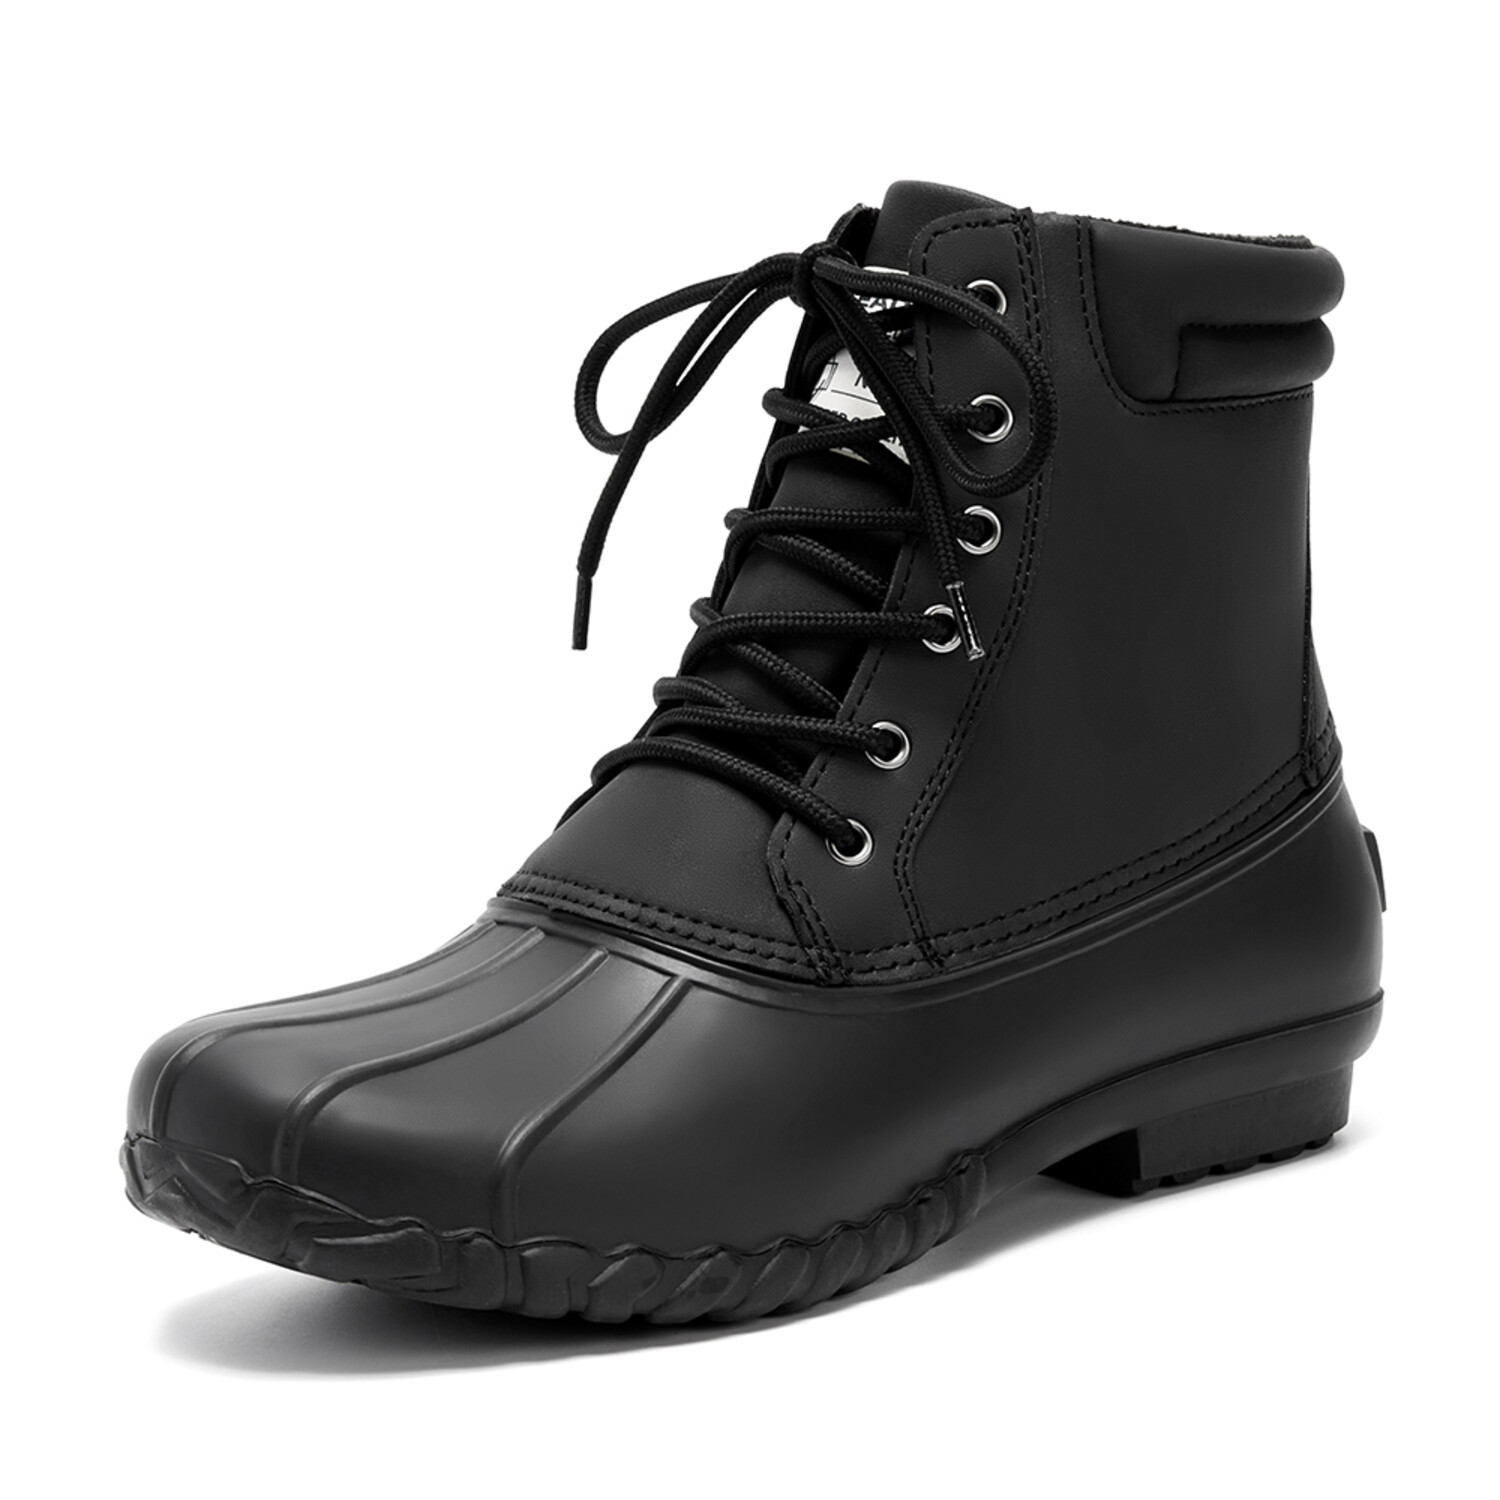 Aleader Mens Duck Boot | Waterproof Shell | Fur Lined Insulated Winter ...